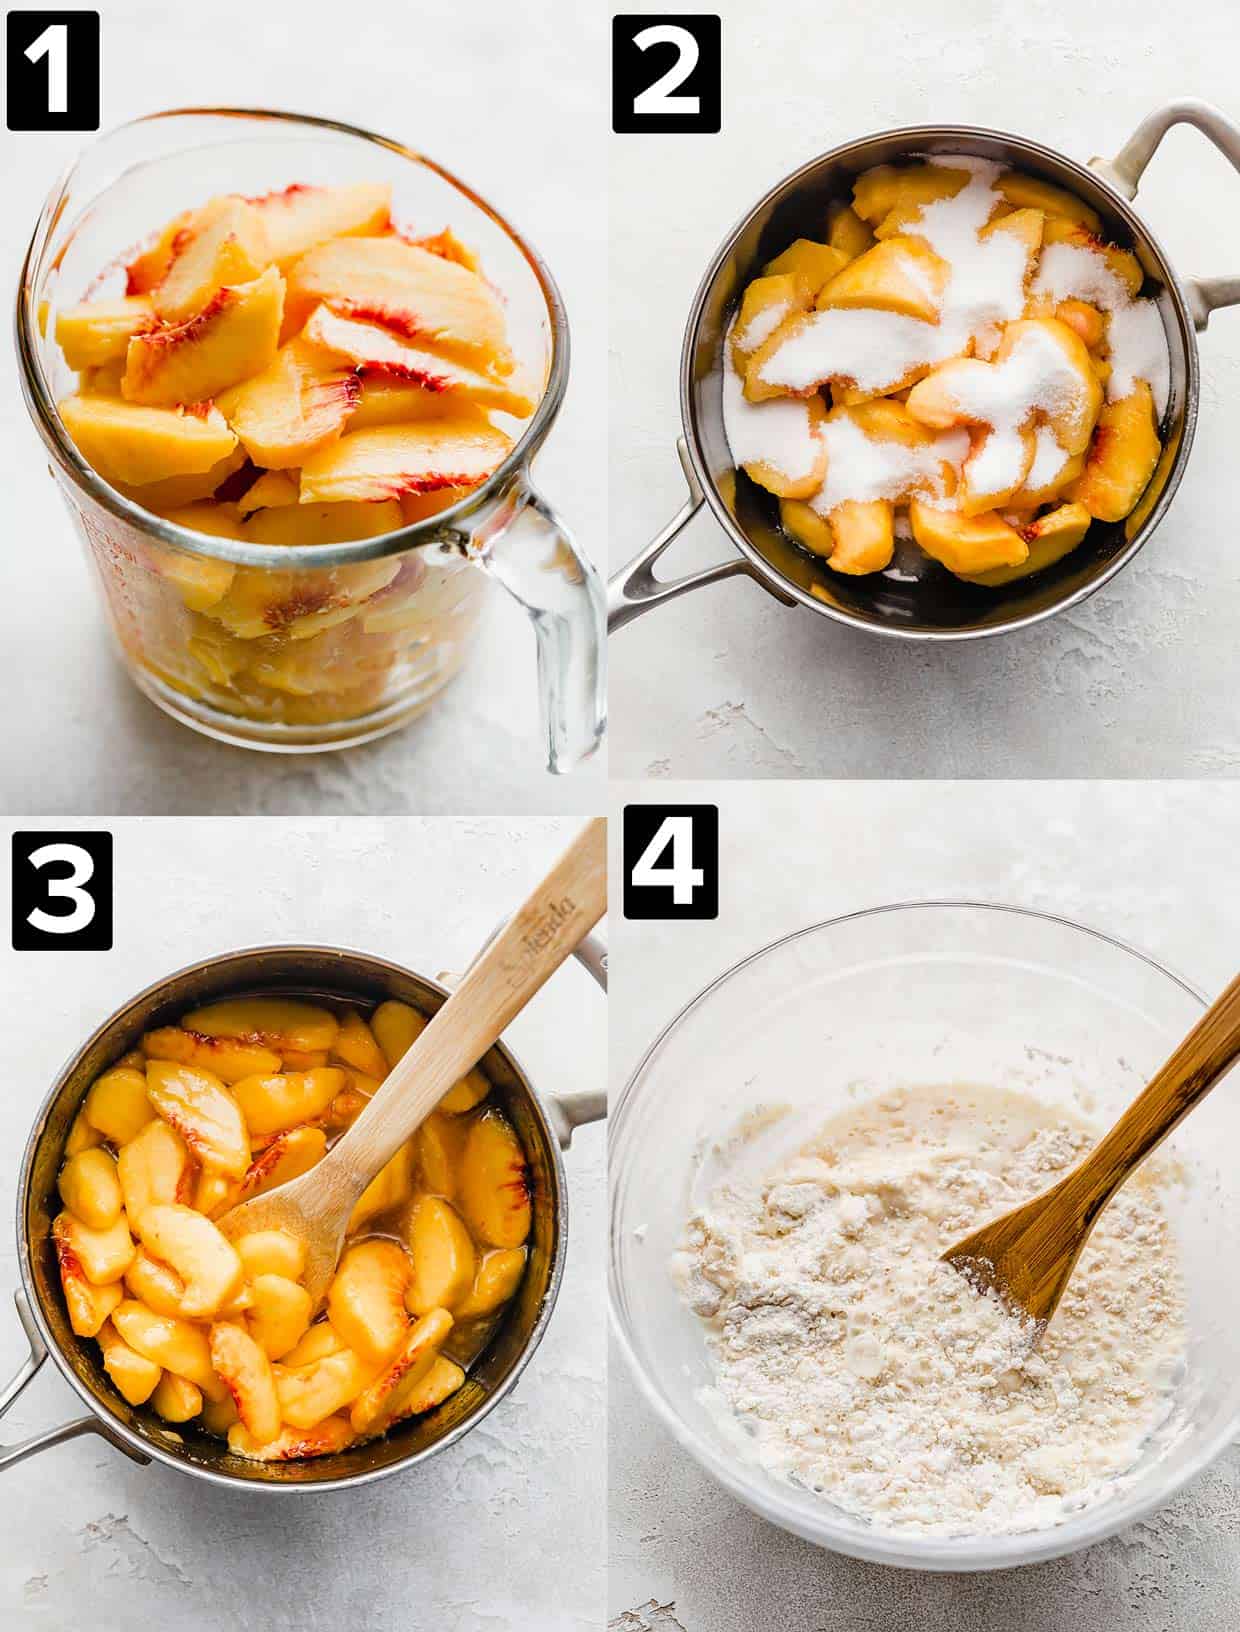 Four images showing how to make old fashioned Peach Cobbler: fresh peaches in a bowl, peaches and sugar in a pan, cooked peaches and sugar in pan, glass bowl with a flour batter in it.